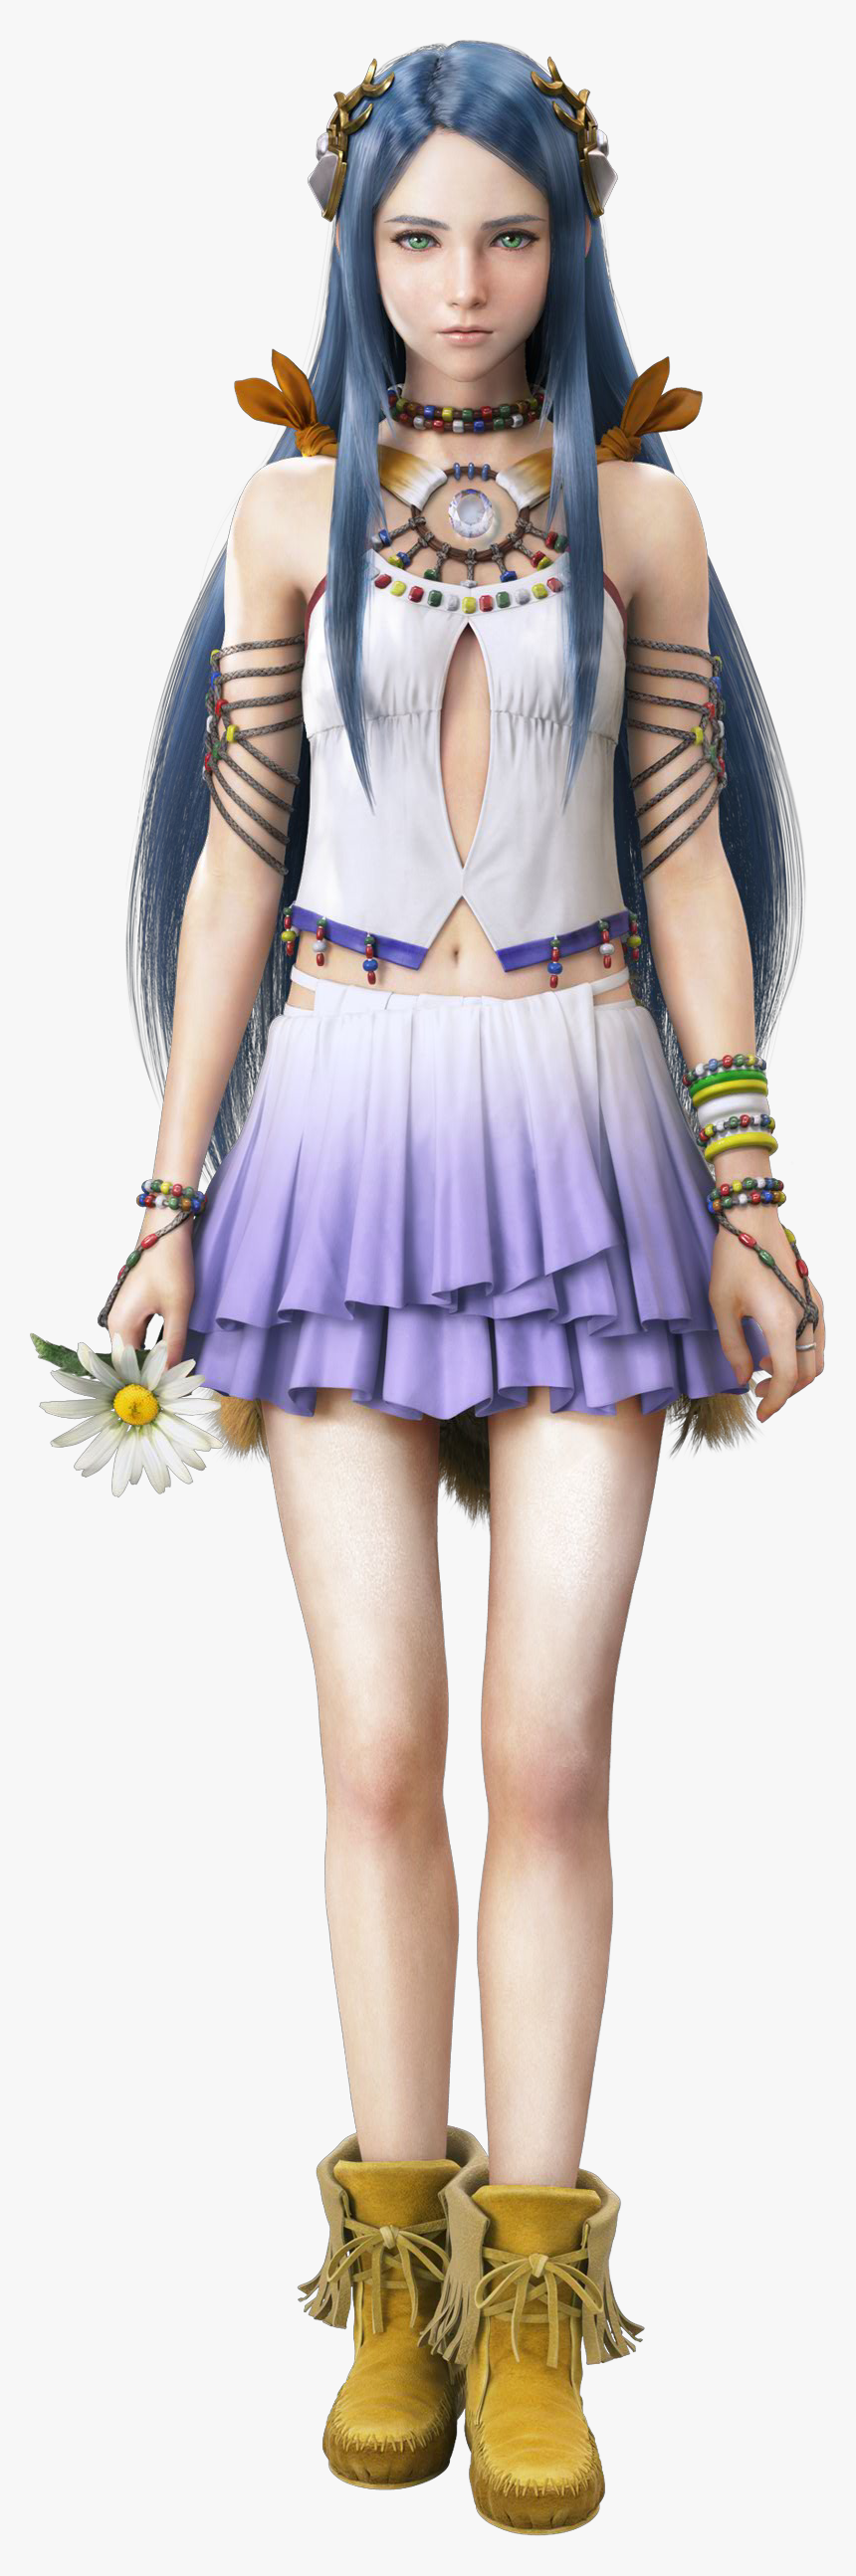 Game Image - Final Fantasy Xiii 2 Yeul, HD Png Download, Free Download